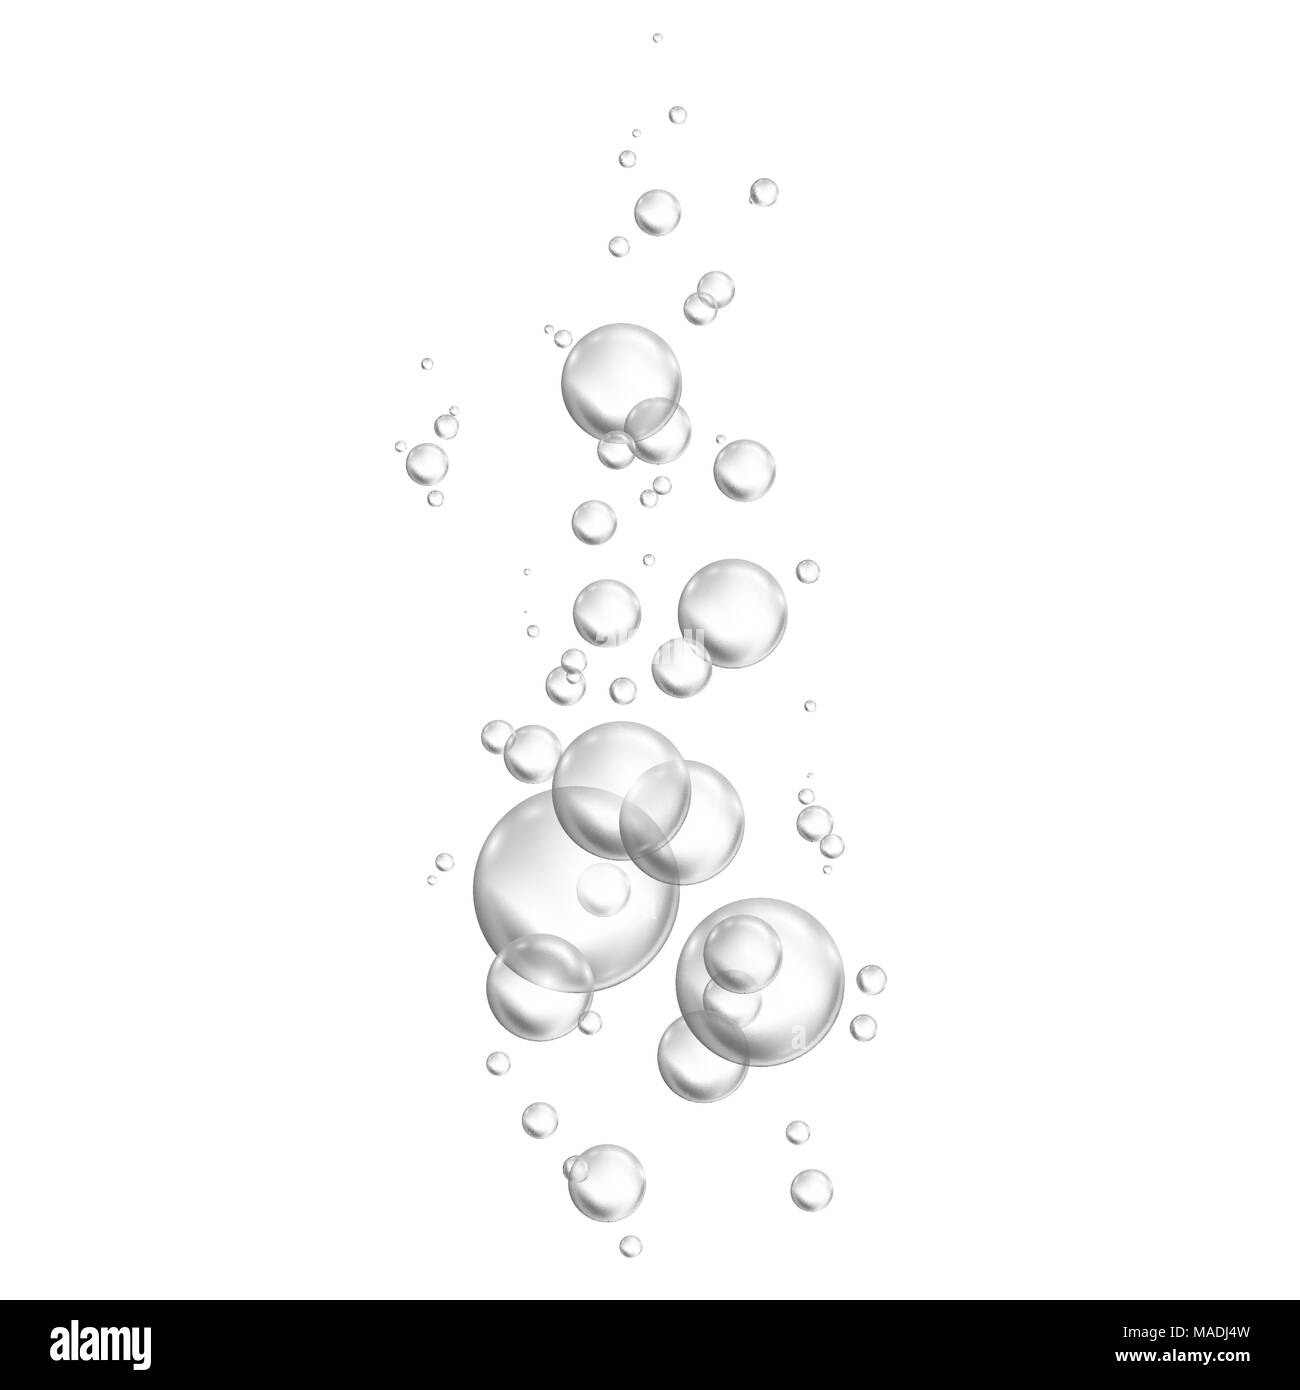 Bubbles white background Black and White Stock Photos & Images - Alamy